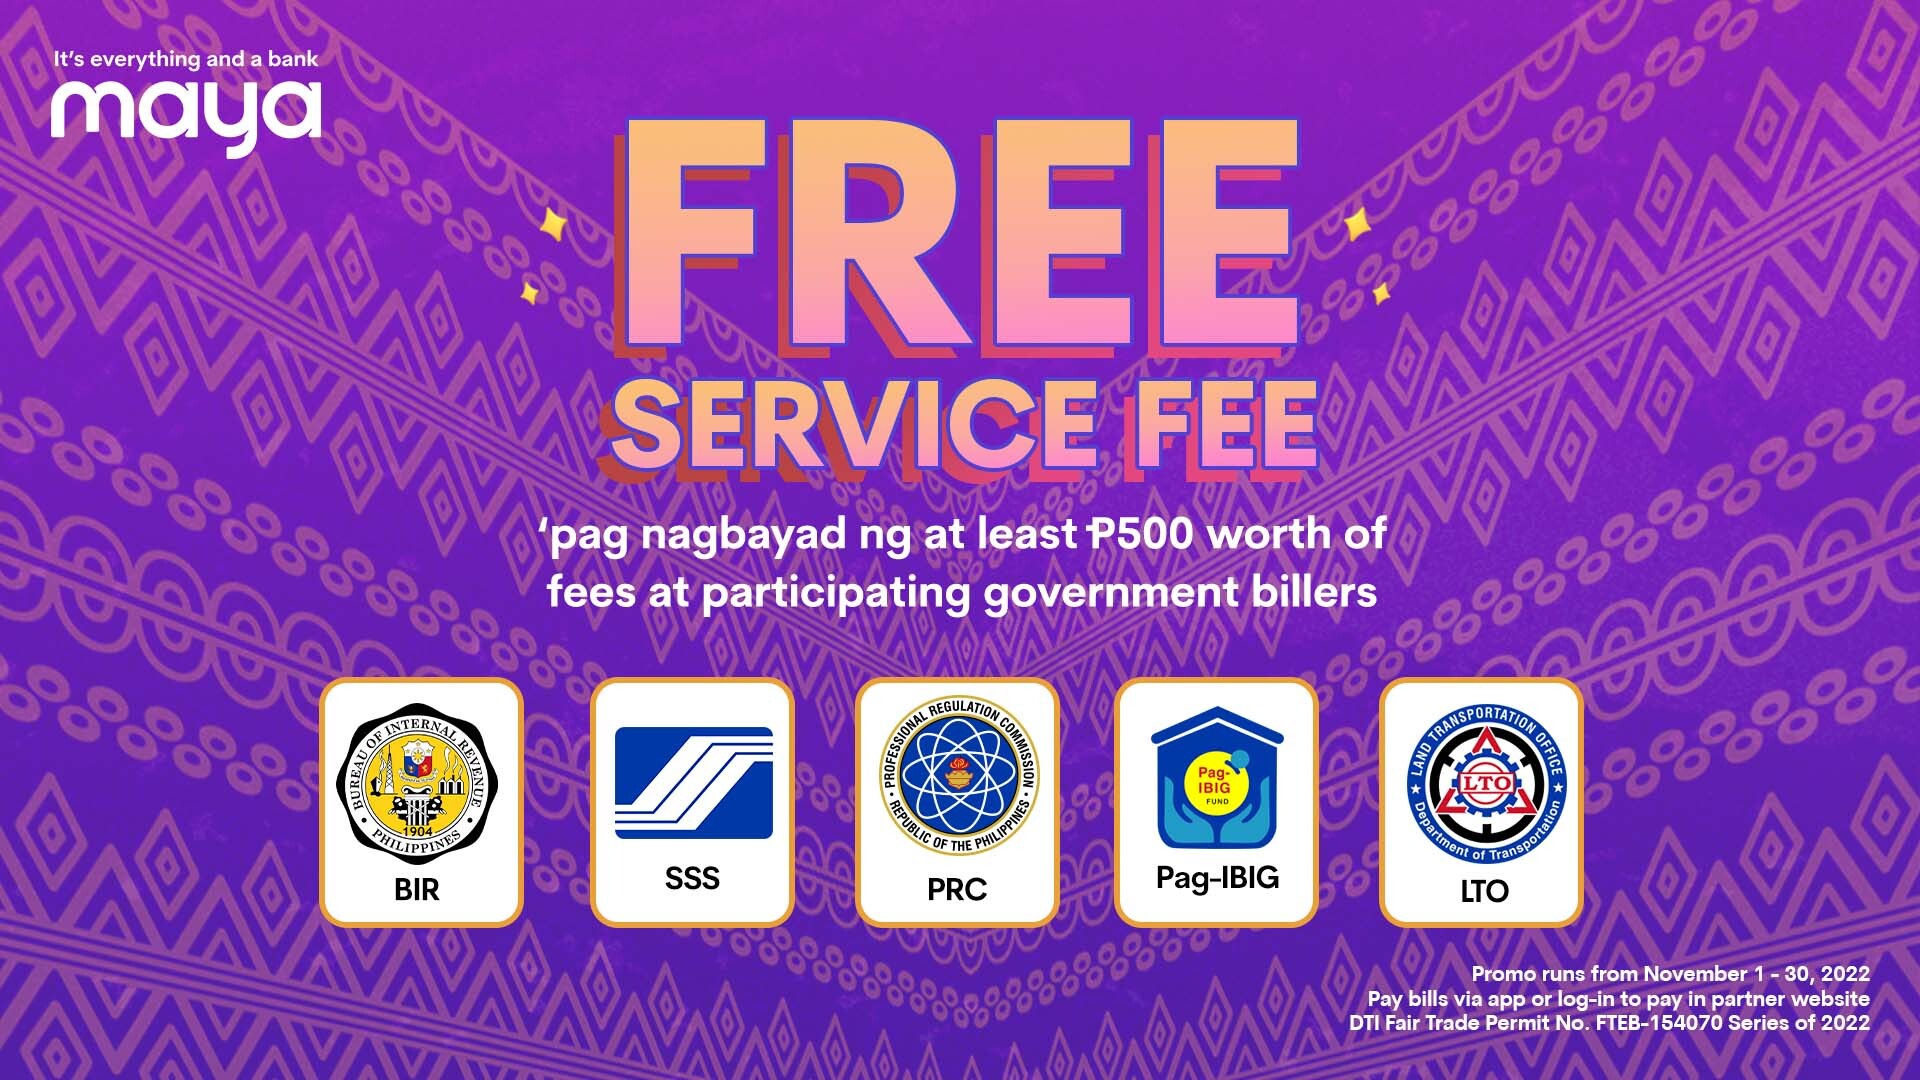 Enjoy FREE Service Fee when you pay your gov’t dues with Maya!